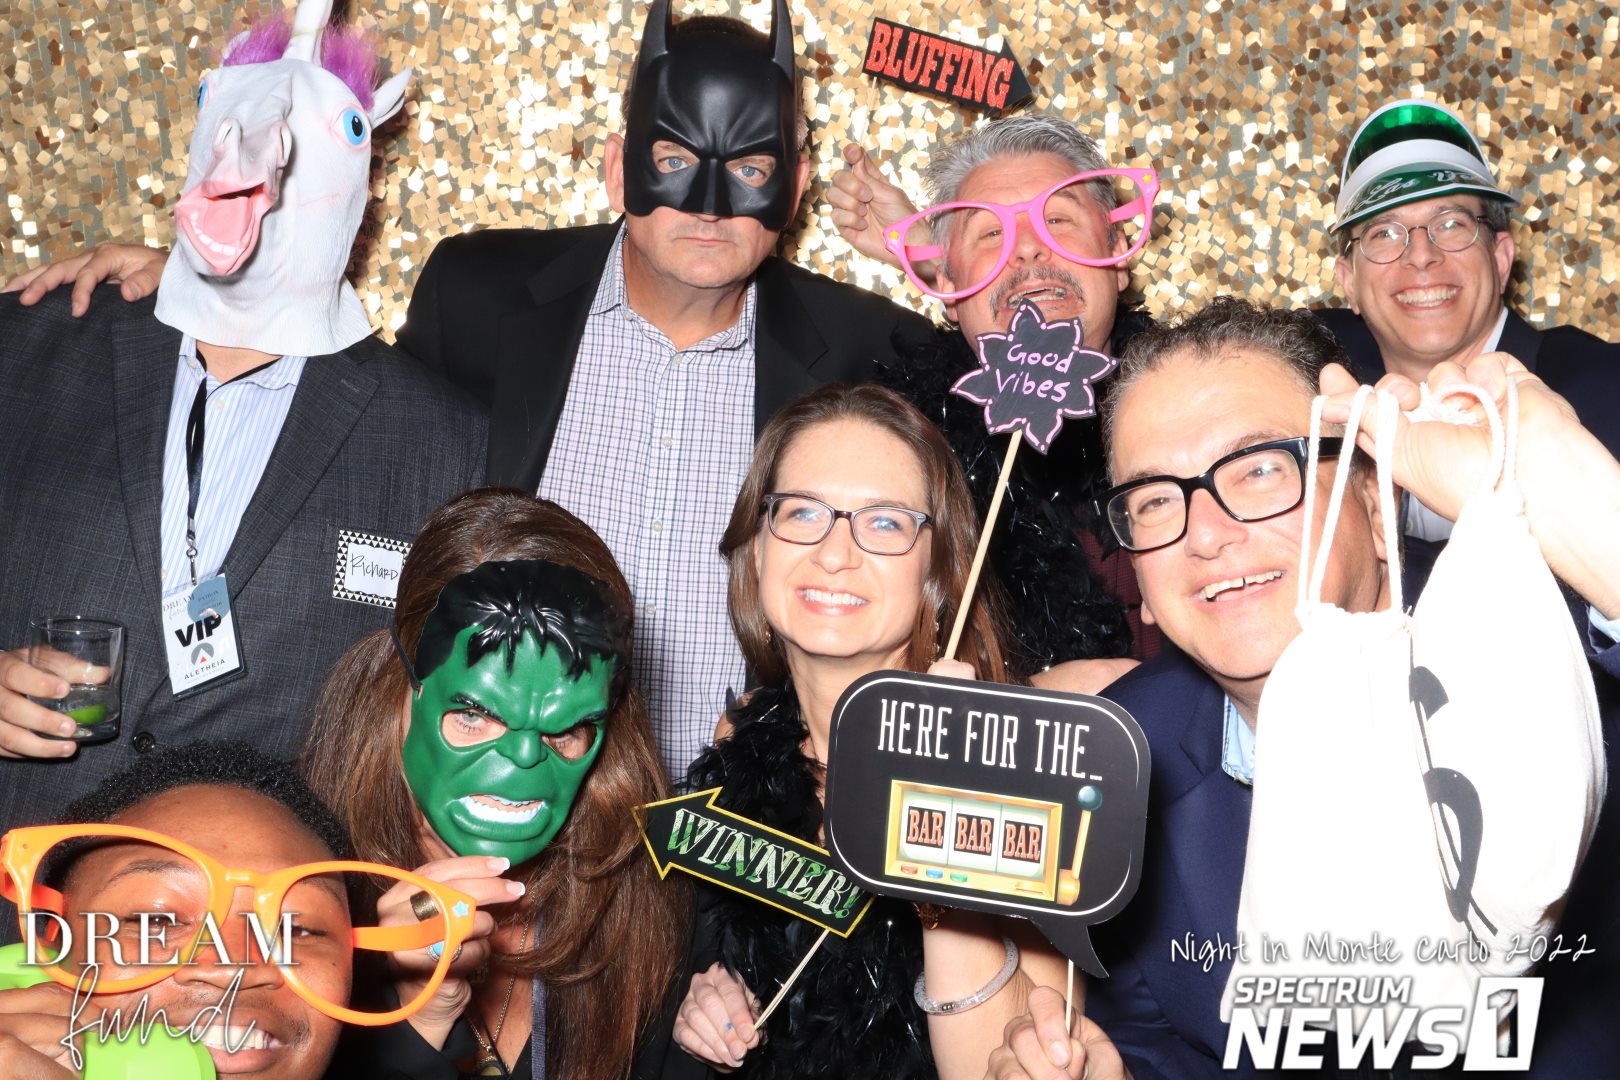 Angela and folks from Aletheia goofing off in a photo booth with silly props and masks.